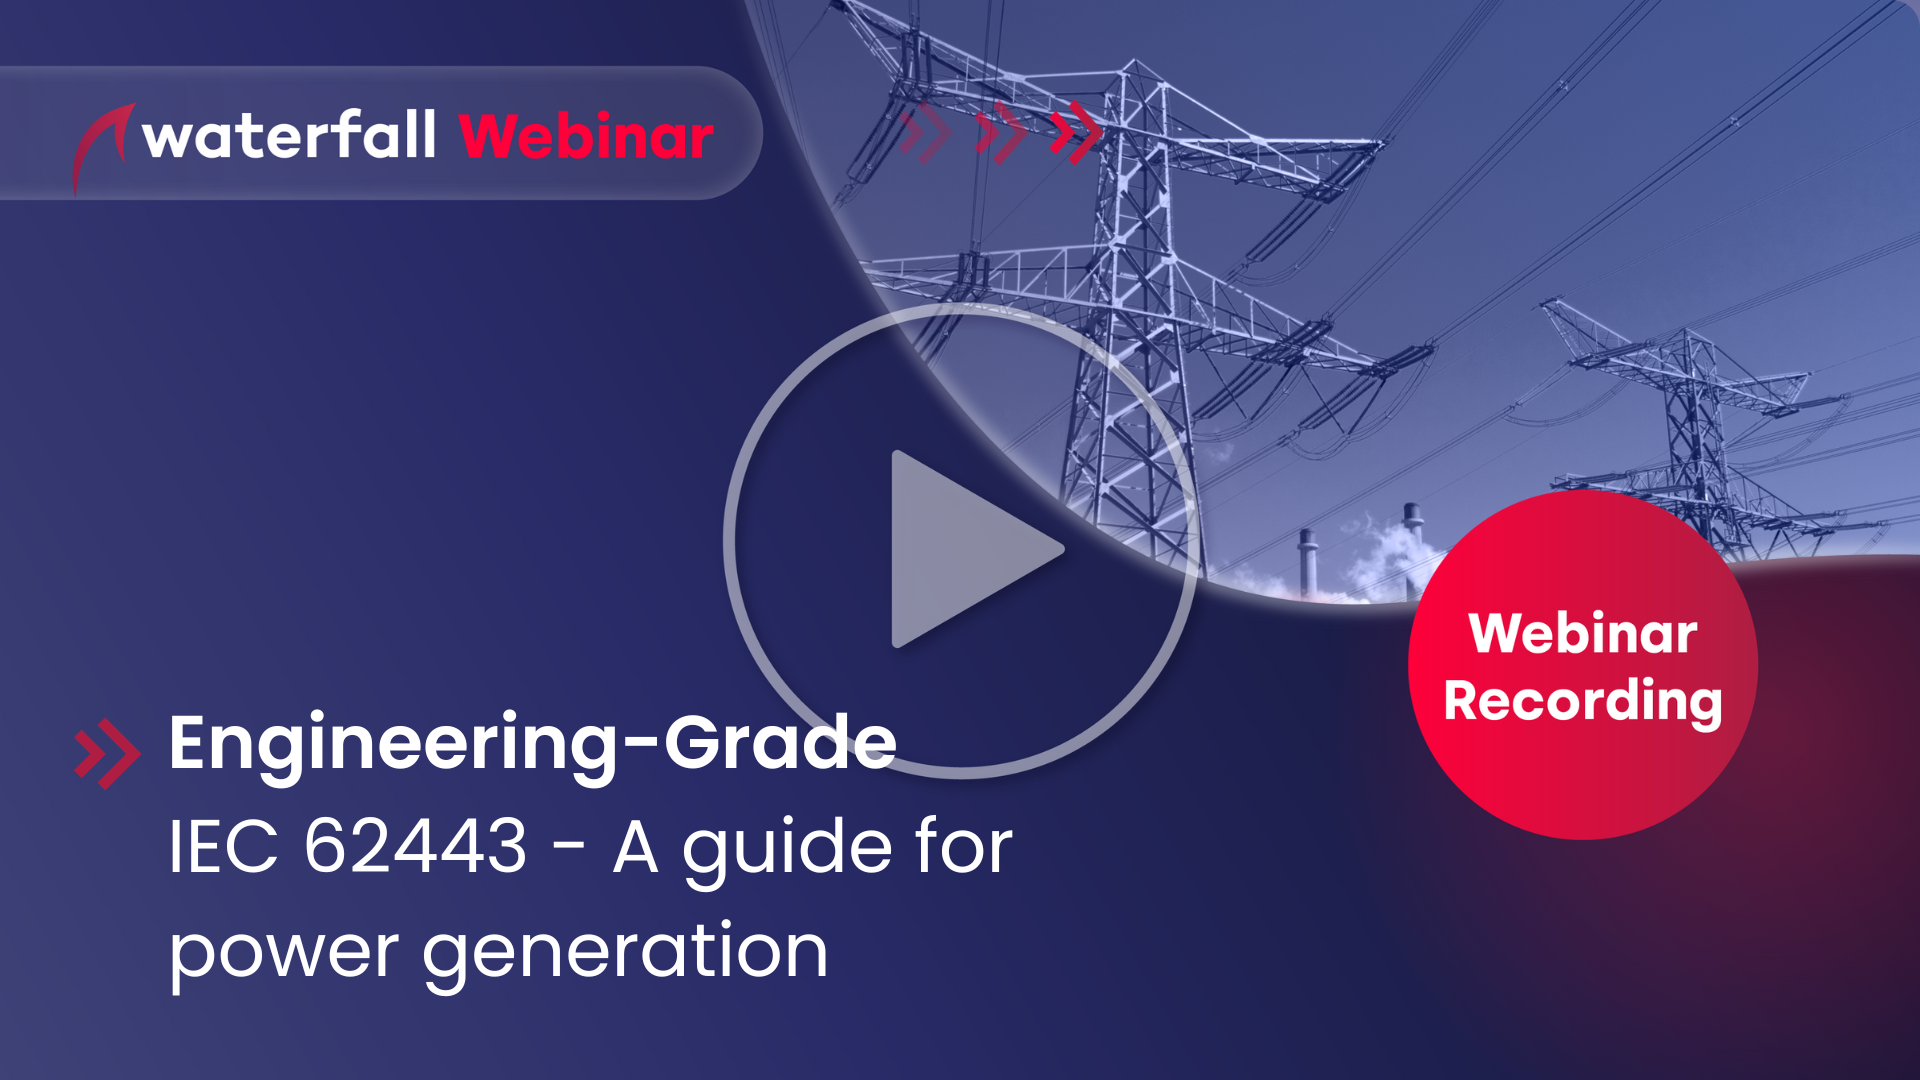 Recorded webinar about IEC 62443 for Power Generation